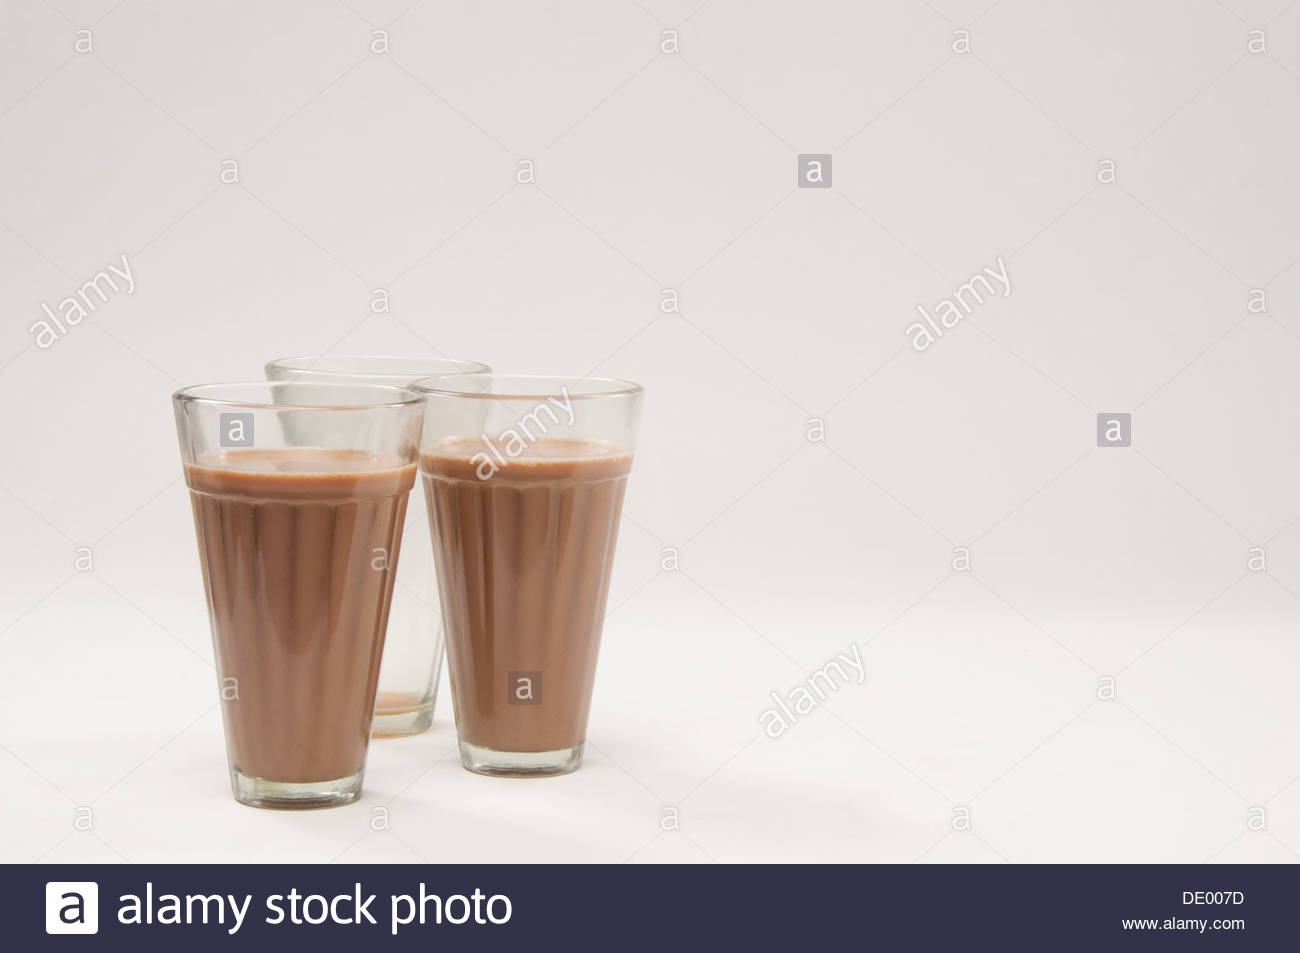 Two Glasses Of Chai With An Empty Glass Isolated Over White Stock